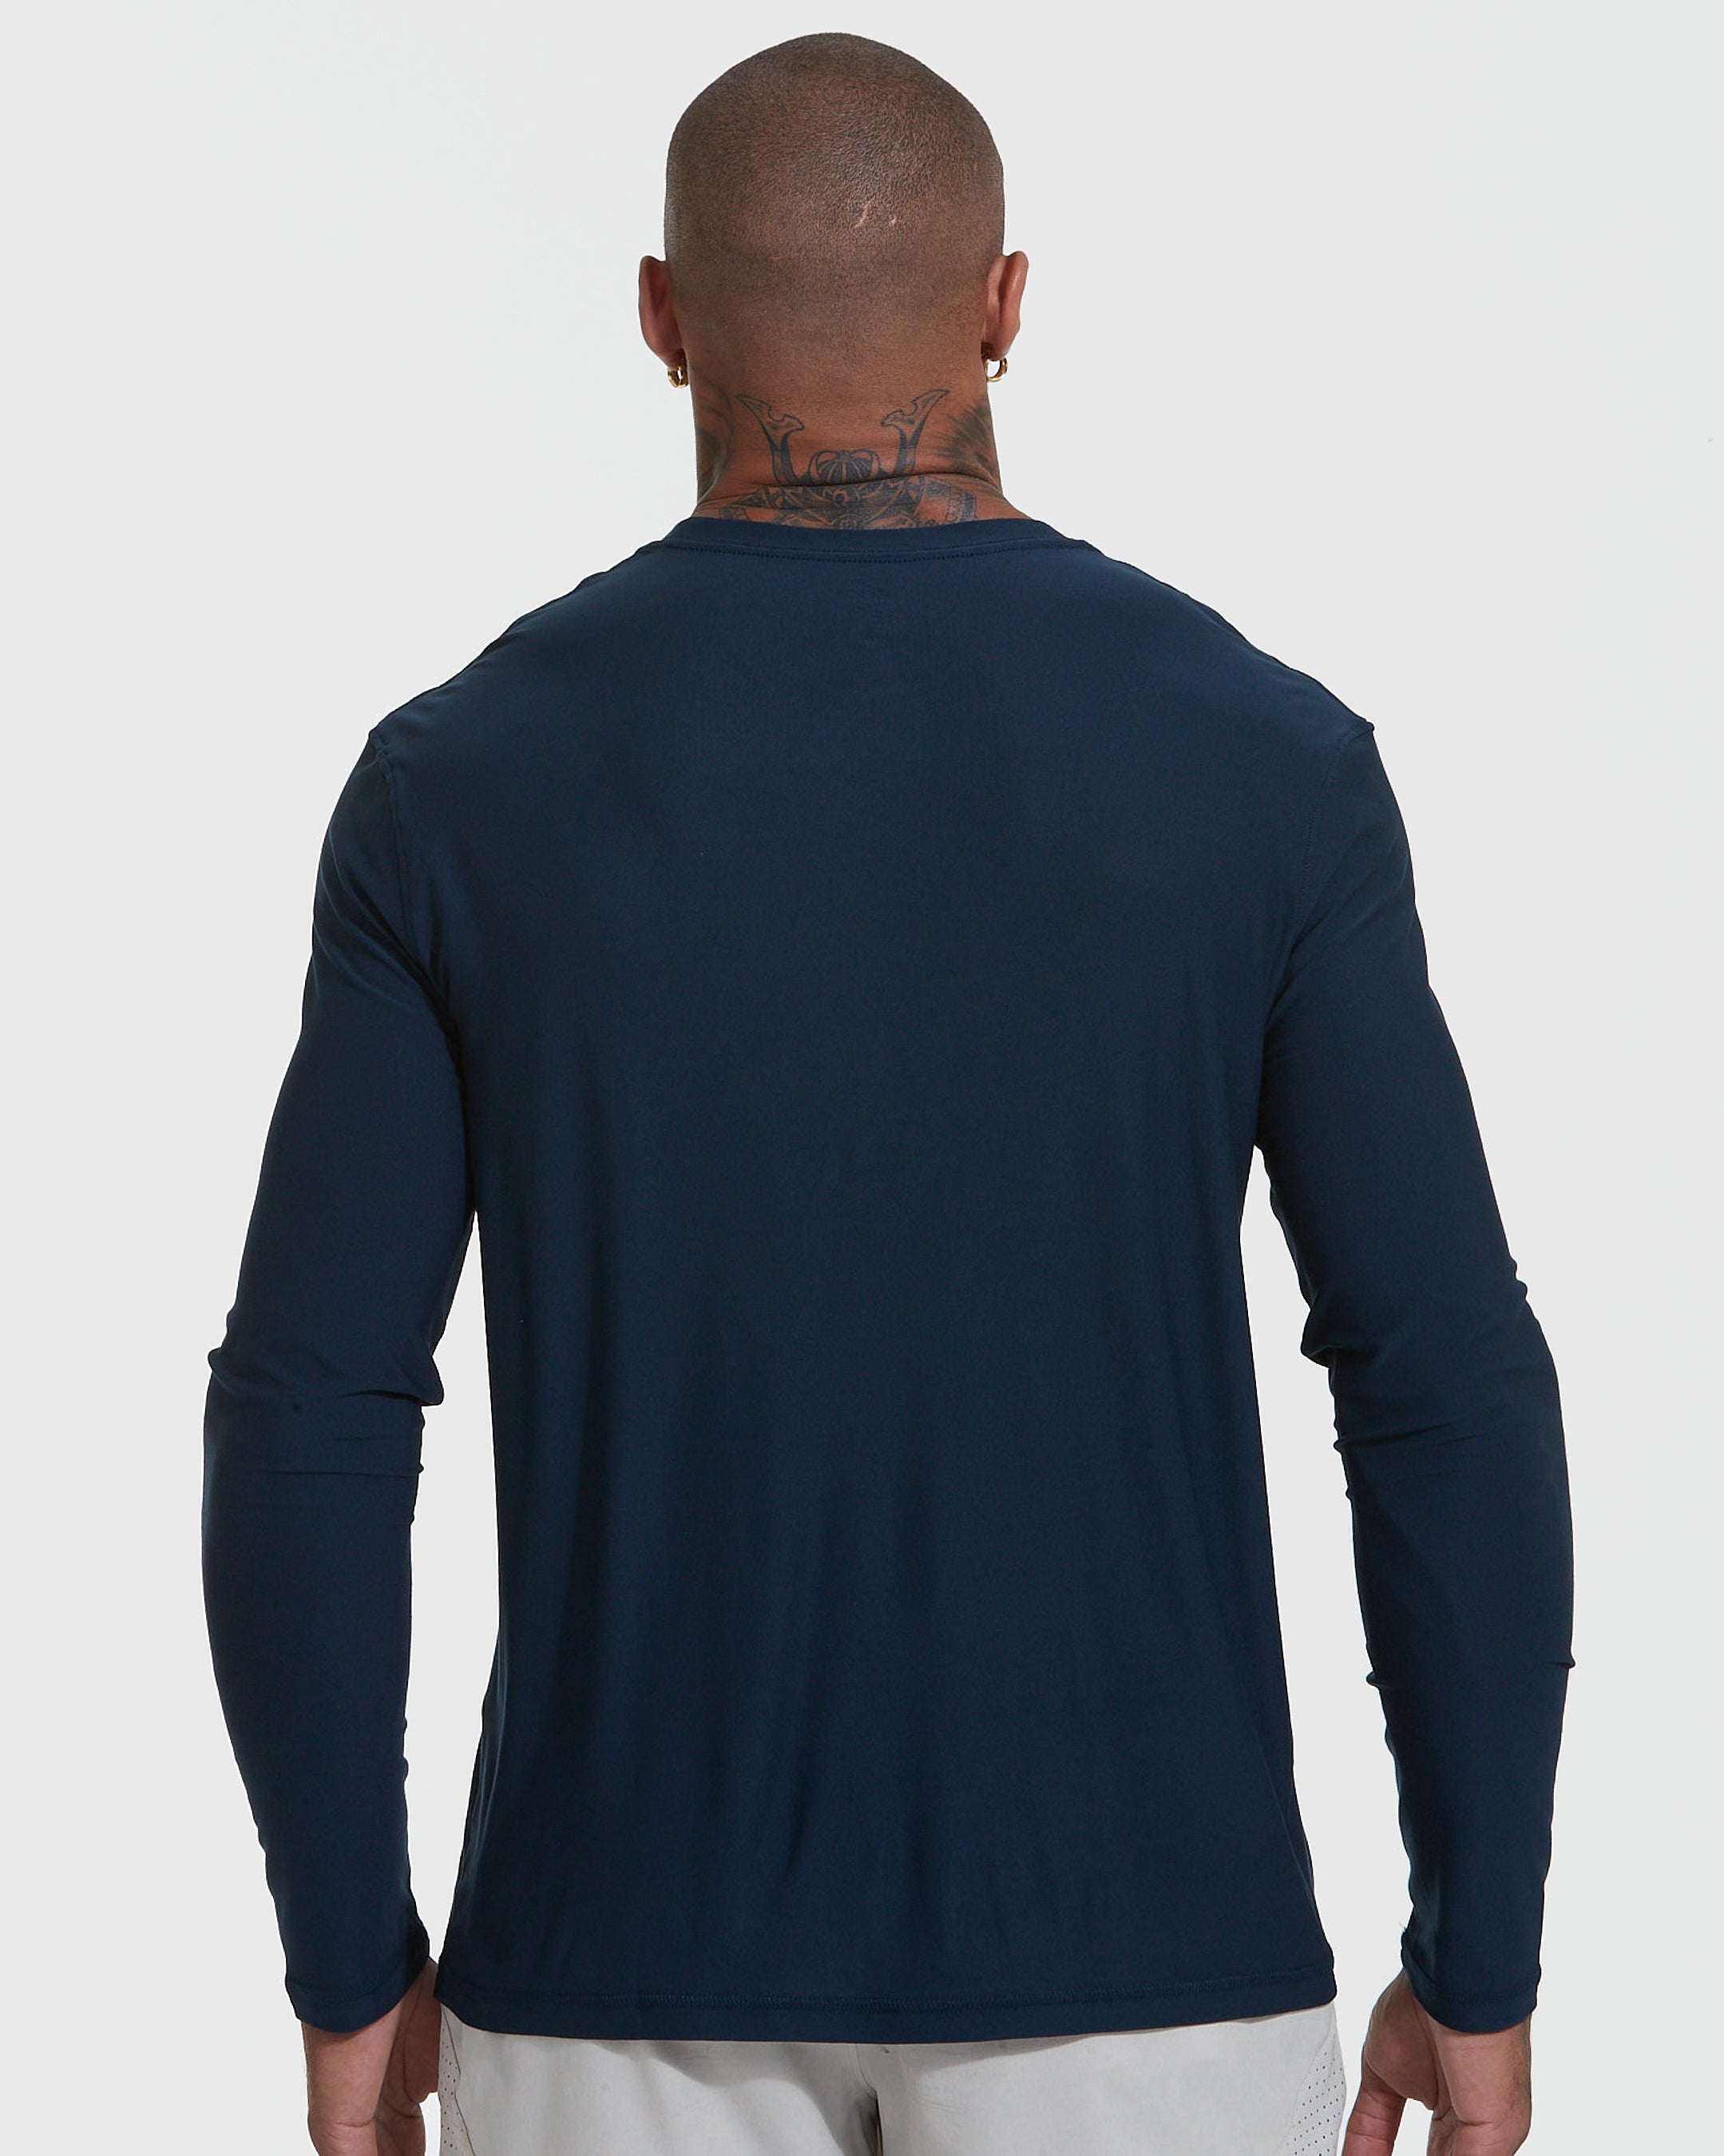 Variety Active Long Sleeve Crew 6-Pack